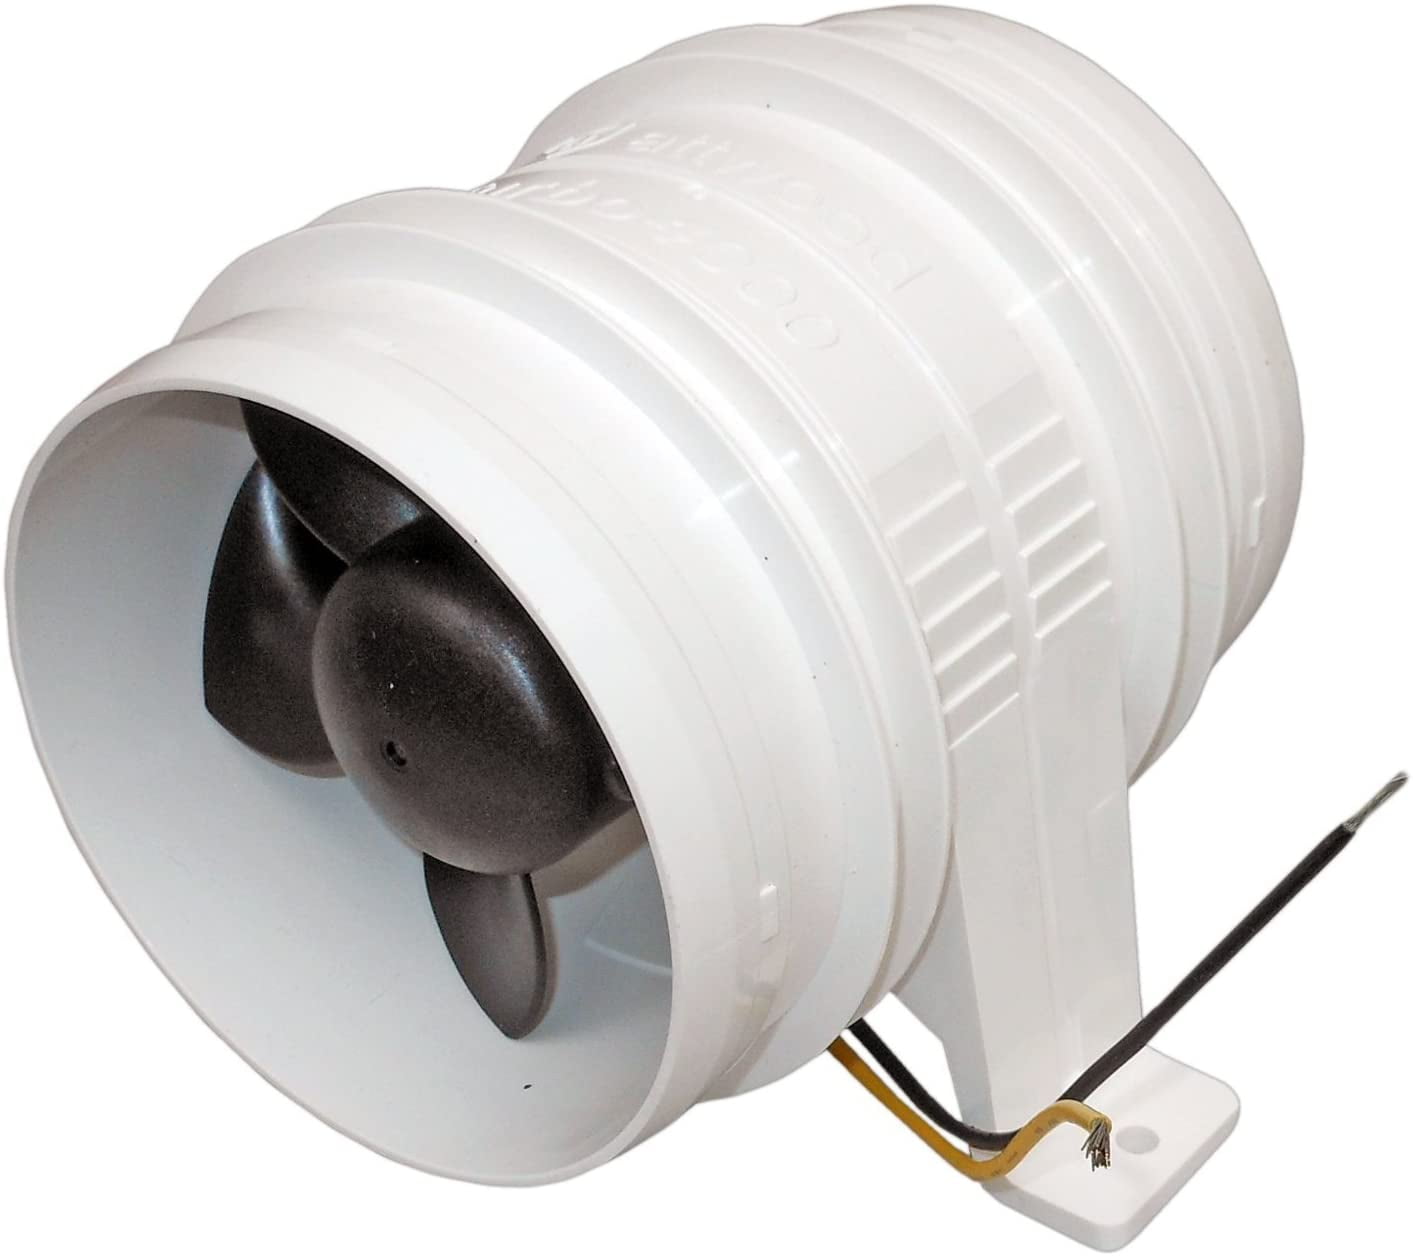 1749-1 Attwood Turbo 4000 In-Line Blowers White 4 inches FO-2836 